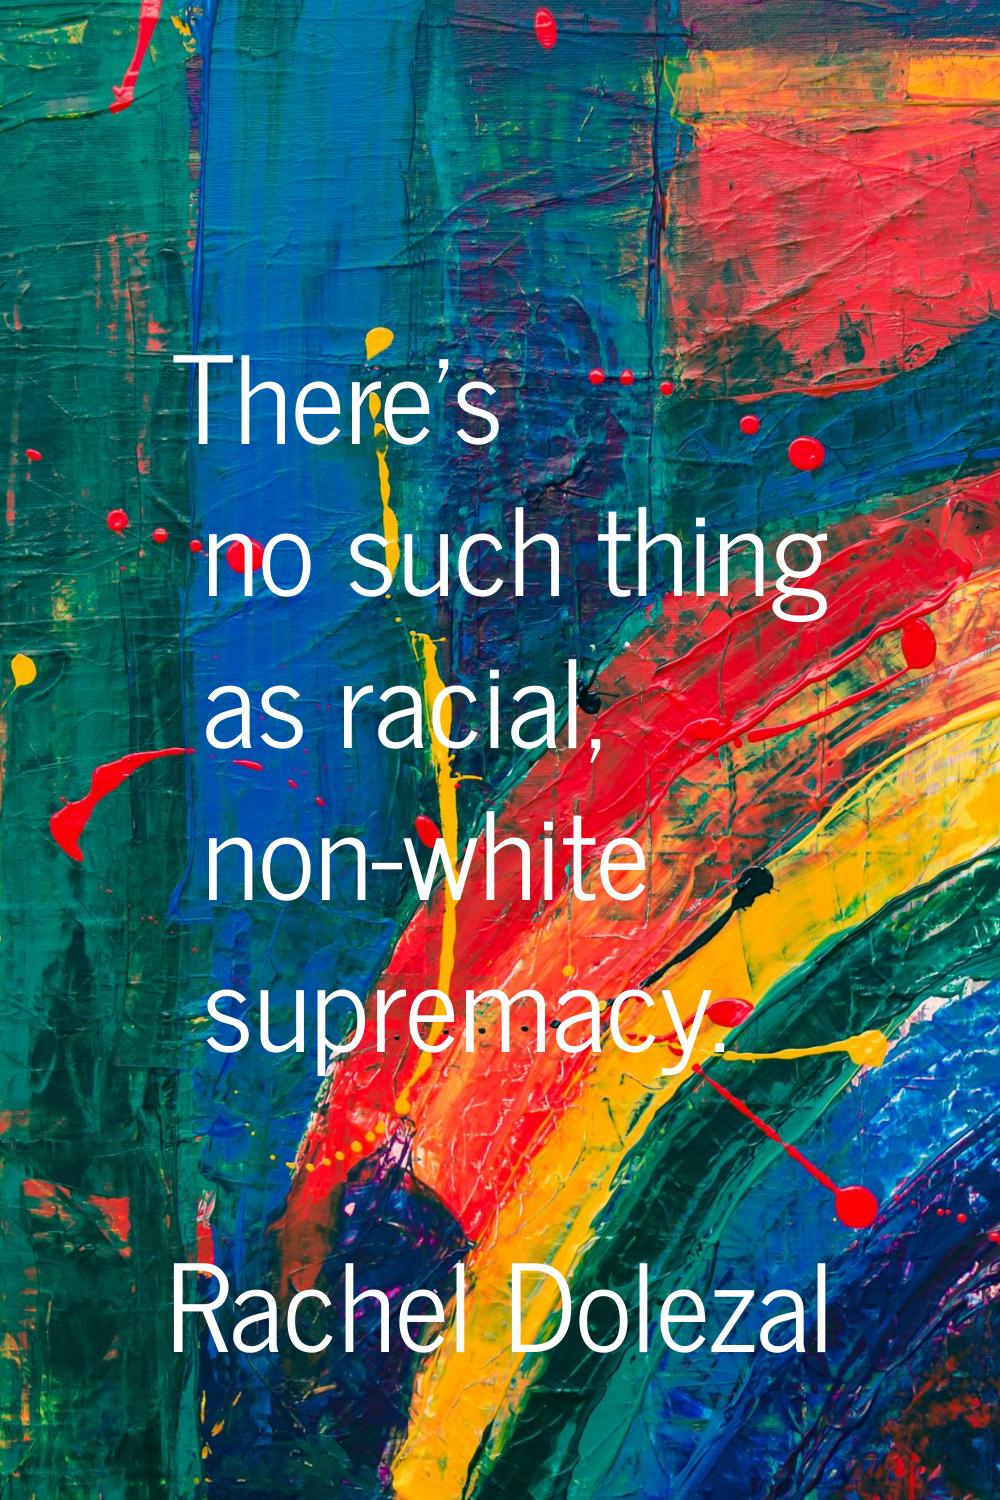 There's no such thing as racial, non-white supremacy.